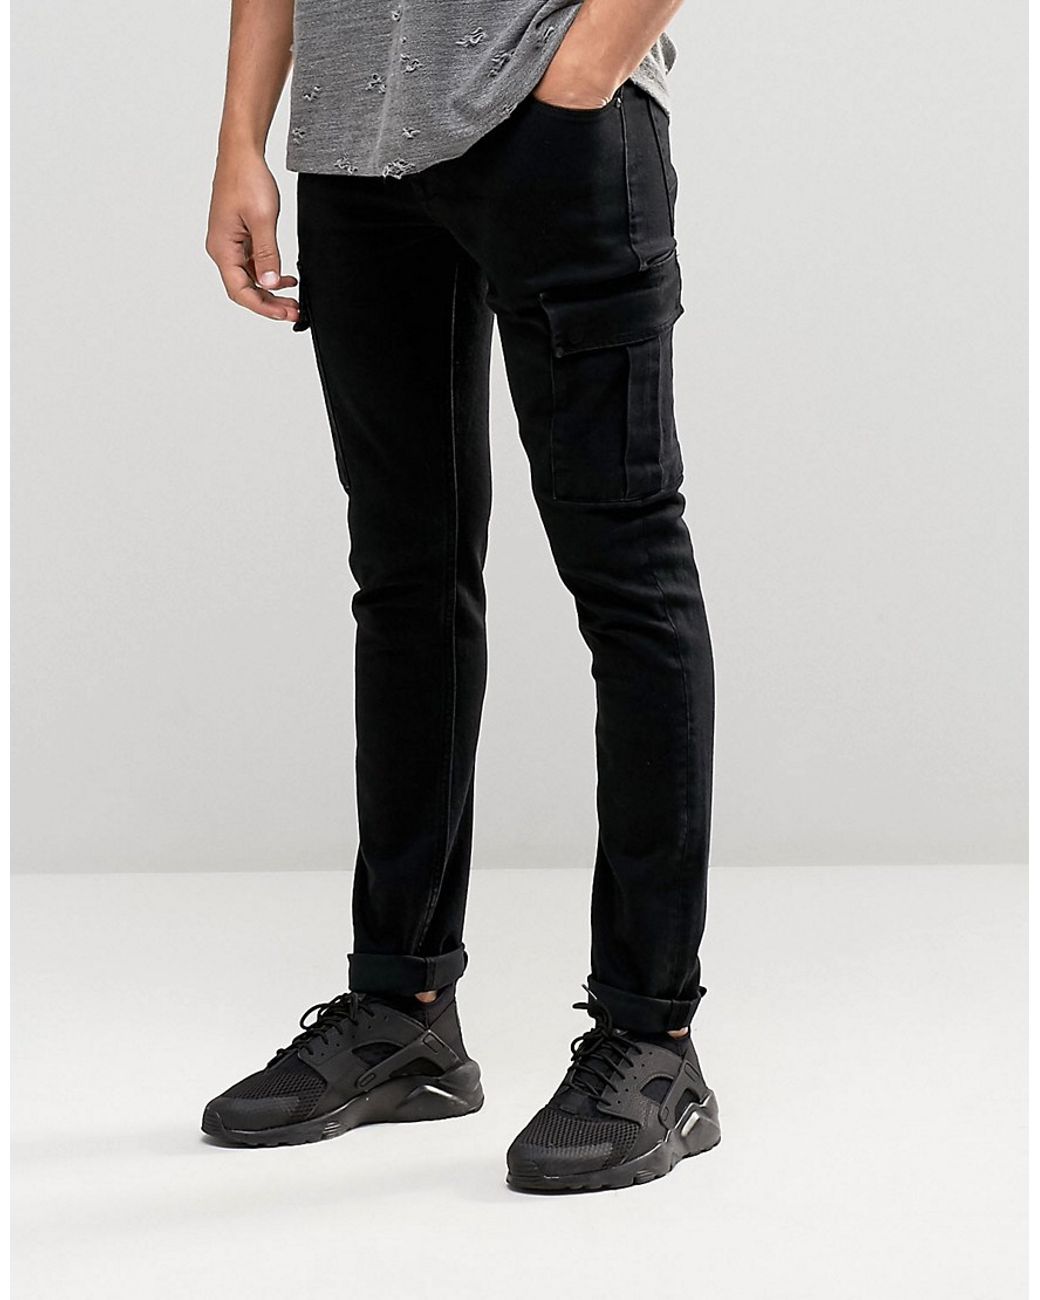 With ASOS | Jeans Super Lyst for Black Pockets Men In Cargo Skinny